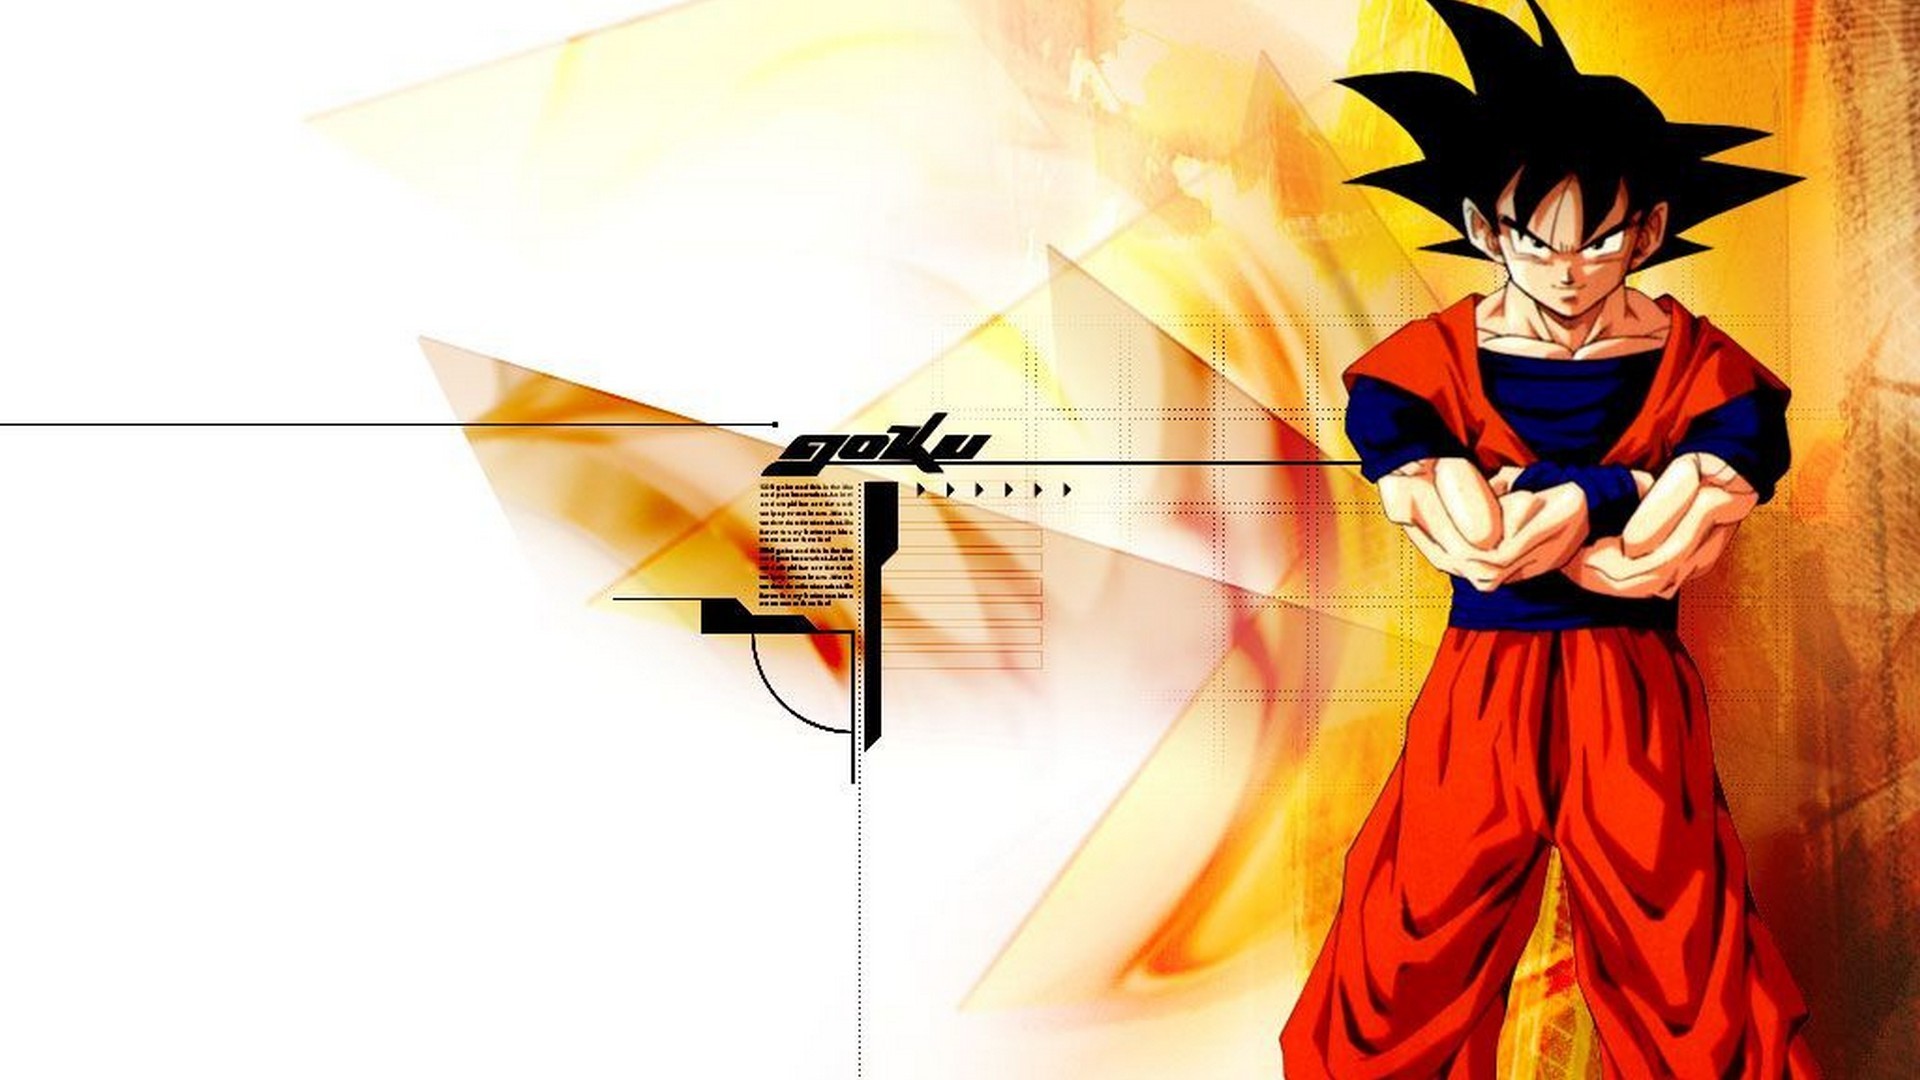 Goku Imagenes Wallpaper with image resolution 1920x1080 pixel. You can use this wallpaper as background for your desktop Computer Screensavers, Android or iPhone smartphones